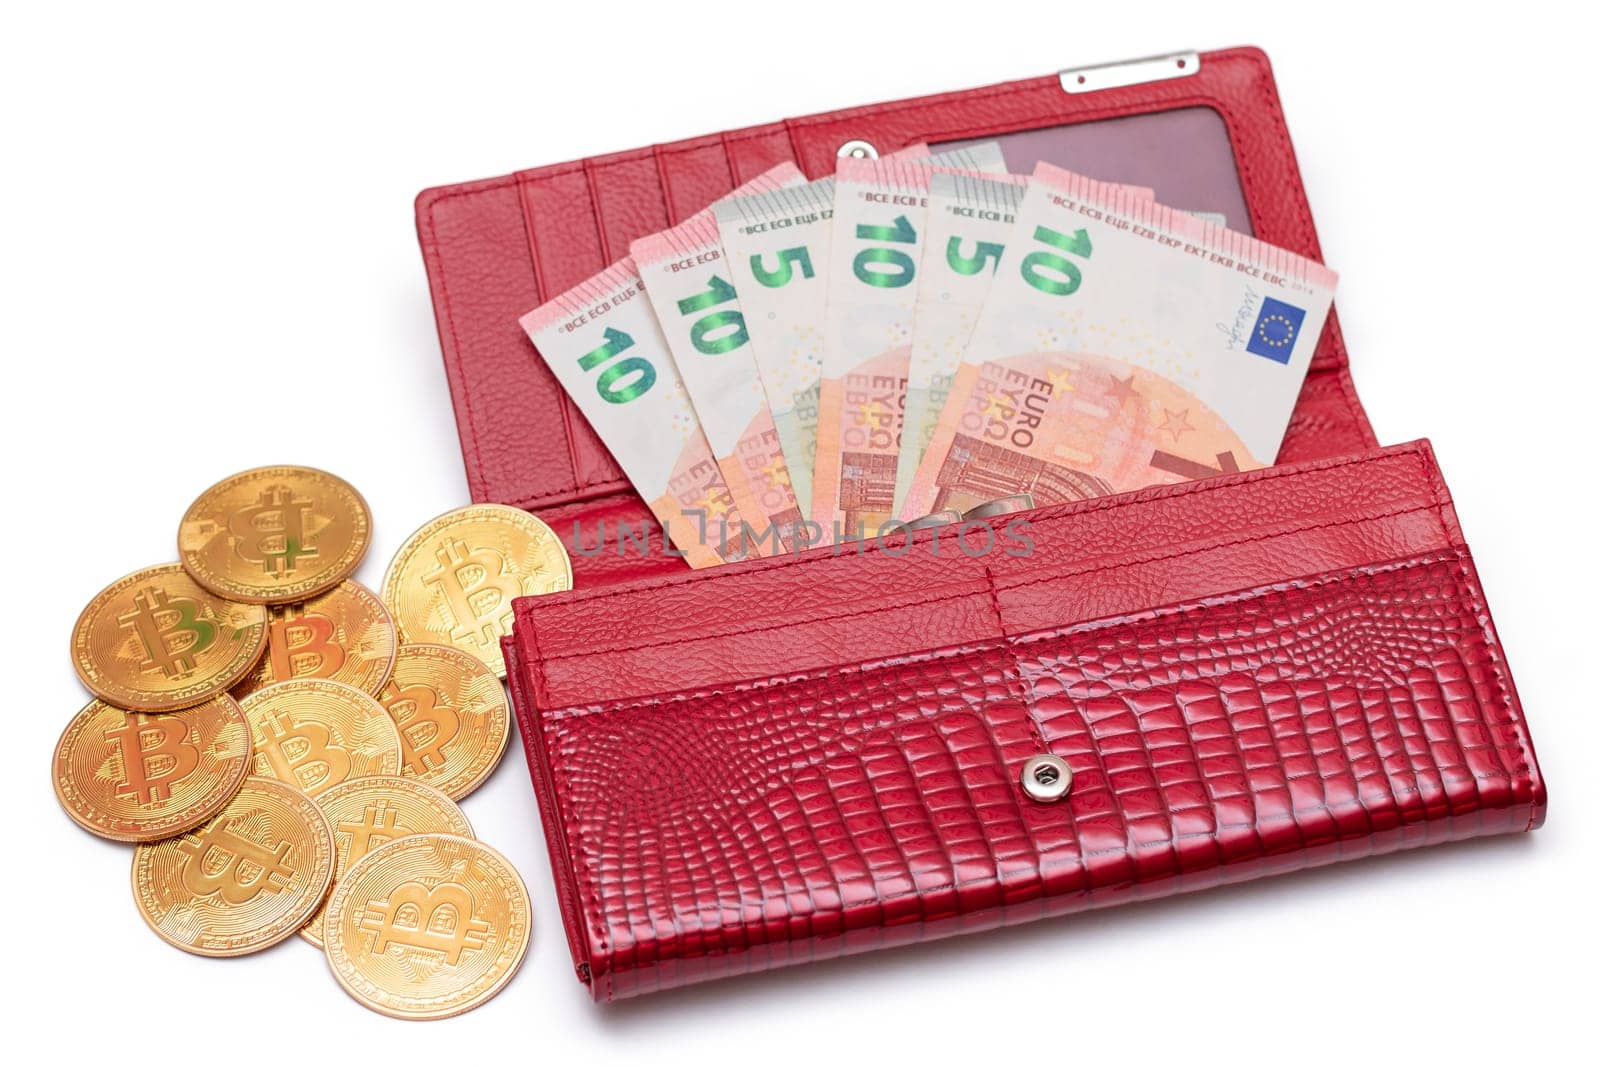 Opened Red Women Purse with 10 Euro Banknotes Inside and Bitcoin Coins - Isolated on White by InfinitumProdux